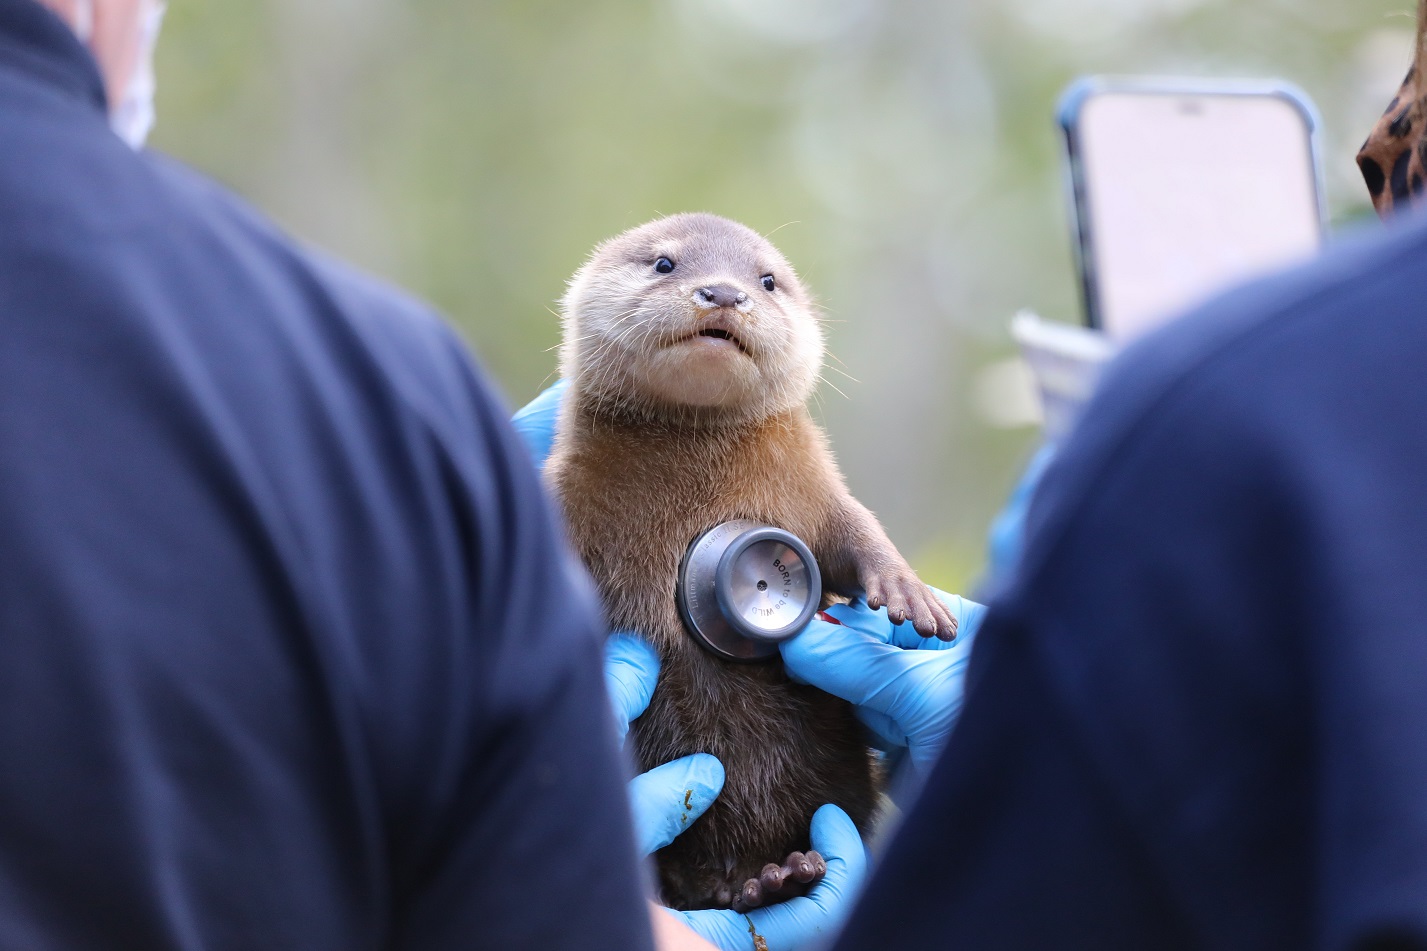 Otter pup getting vet exam health check

Image: Amy Middleton 2023
